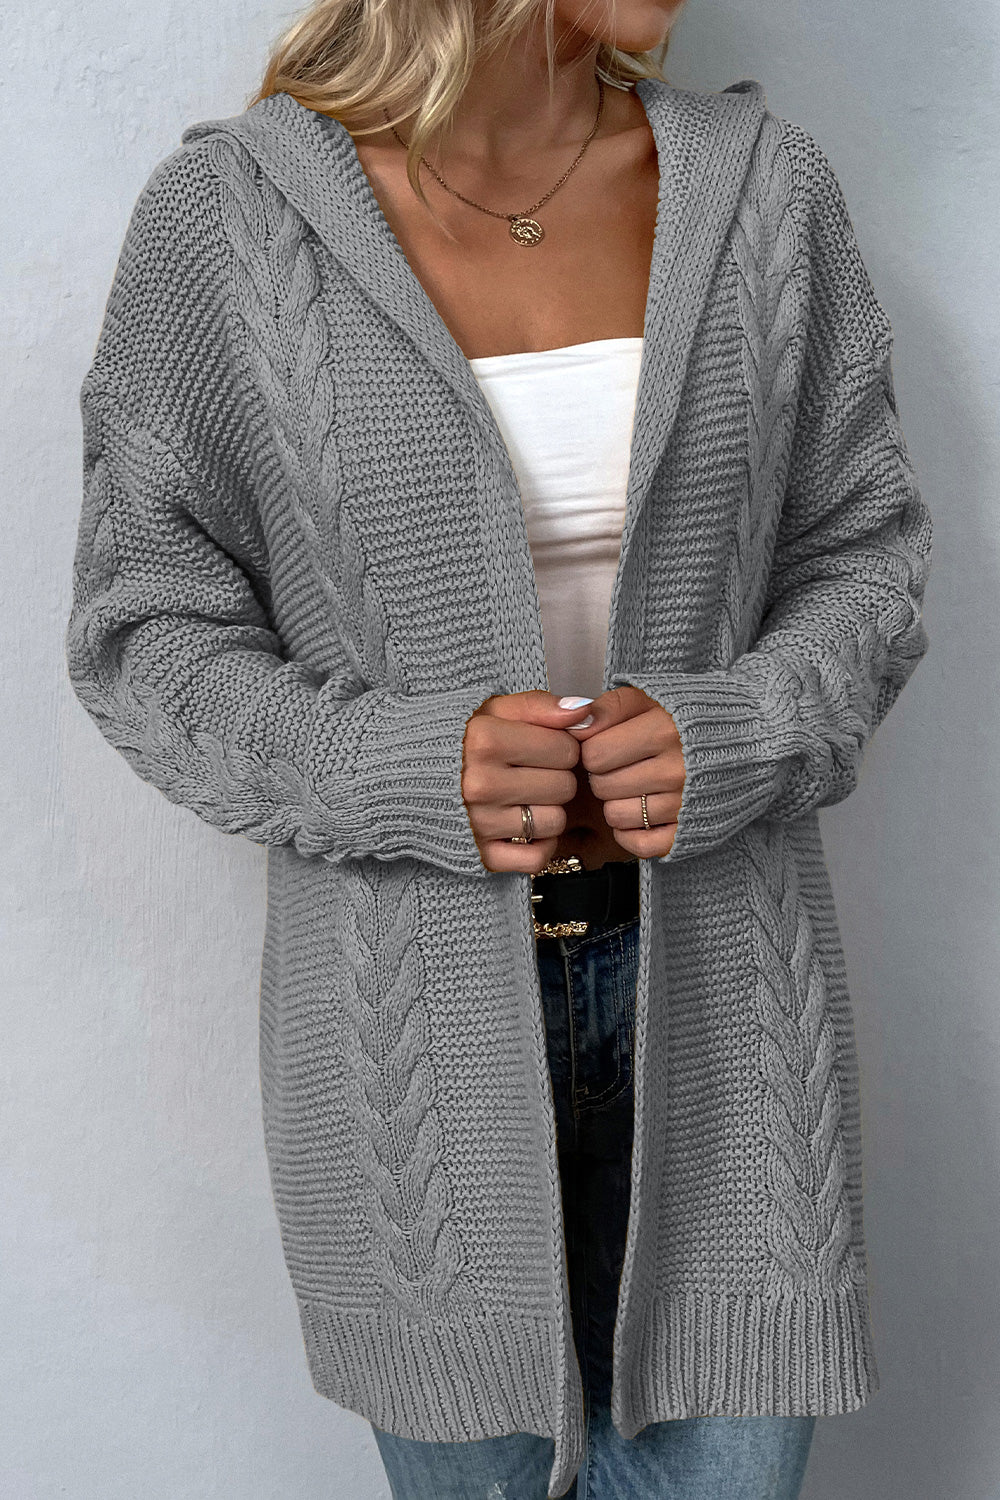 Trendsi Cupid Beauty Supplies Charcoal / S Woman Cardigan Cable-Knit Dropped Shoulder Hooded Cardigan